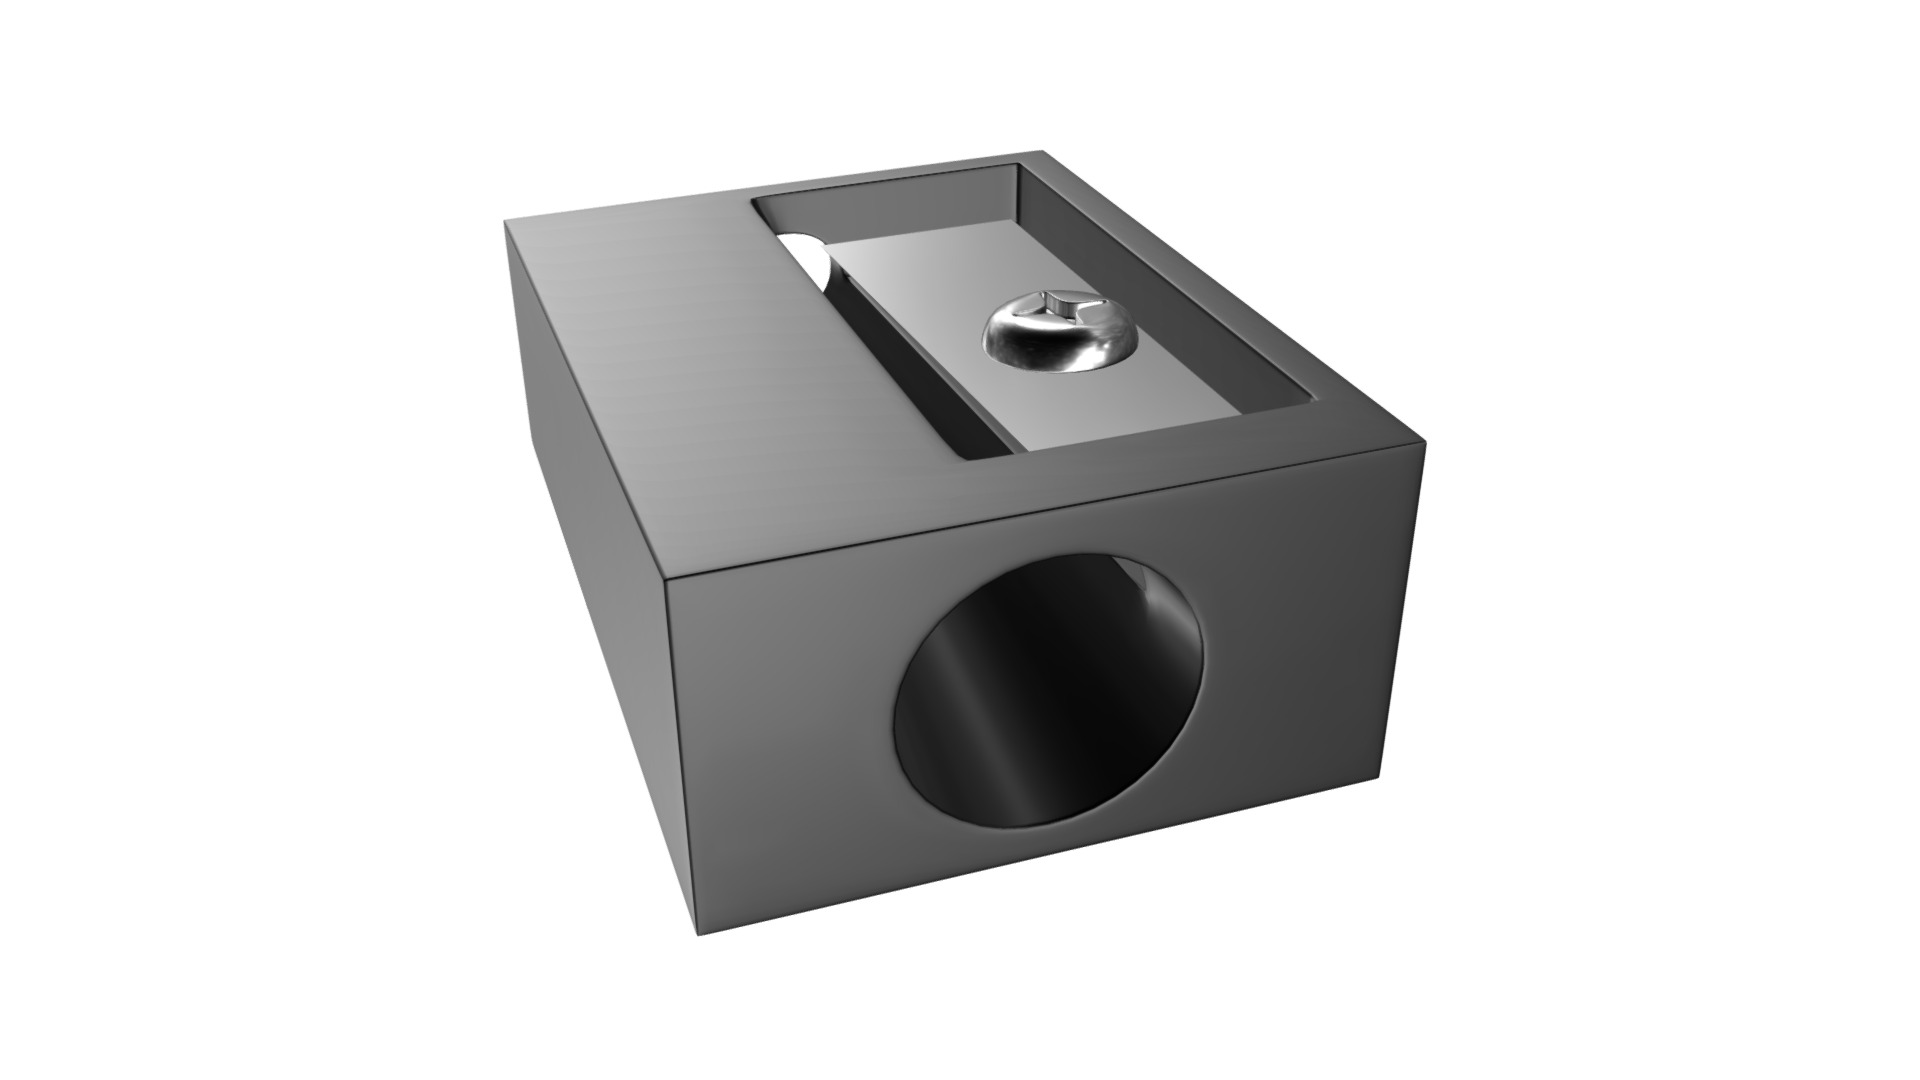 3D model Pencil sharpener - This is a 3D model of the Pencil sharpener. The 3D model is about a silver and black speaker.